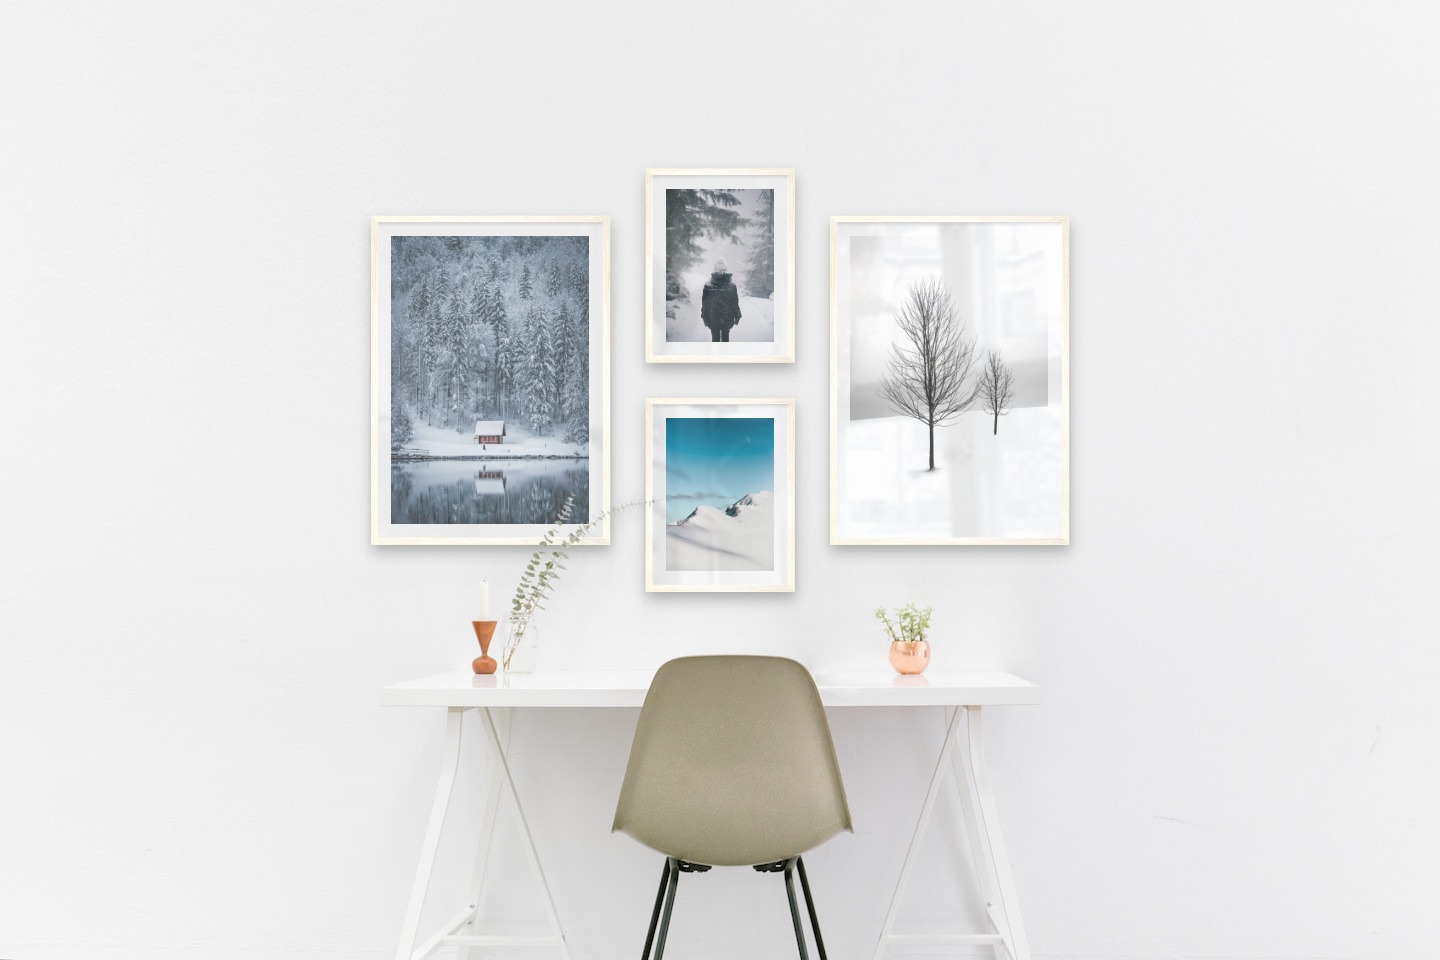 Gallery wall with picture frames in light wood in sizes 50x70 and 30x40 with prints "Cottage by the lake", "Person in the snow", "Snowy mountain peaks" and "Trees in the snow"